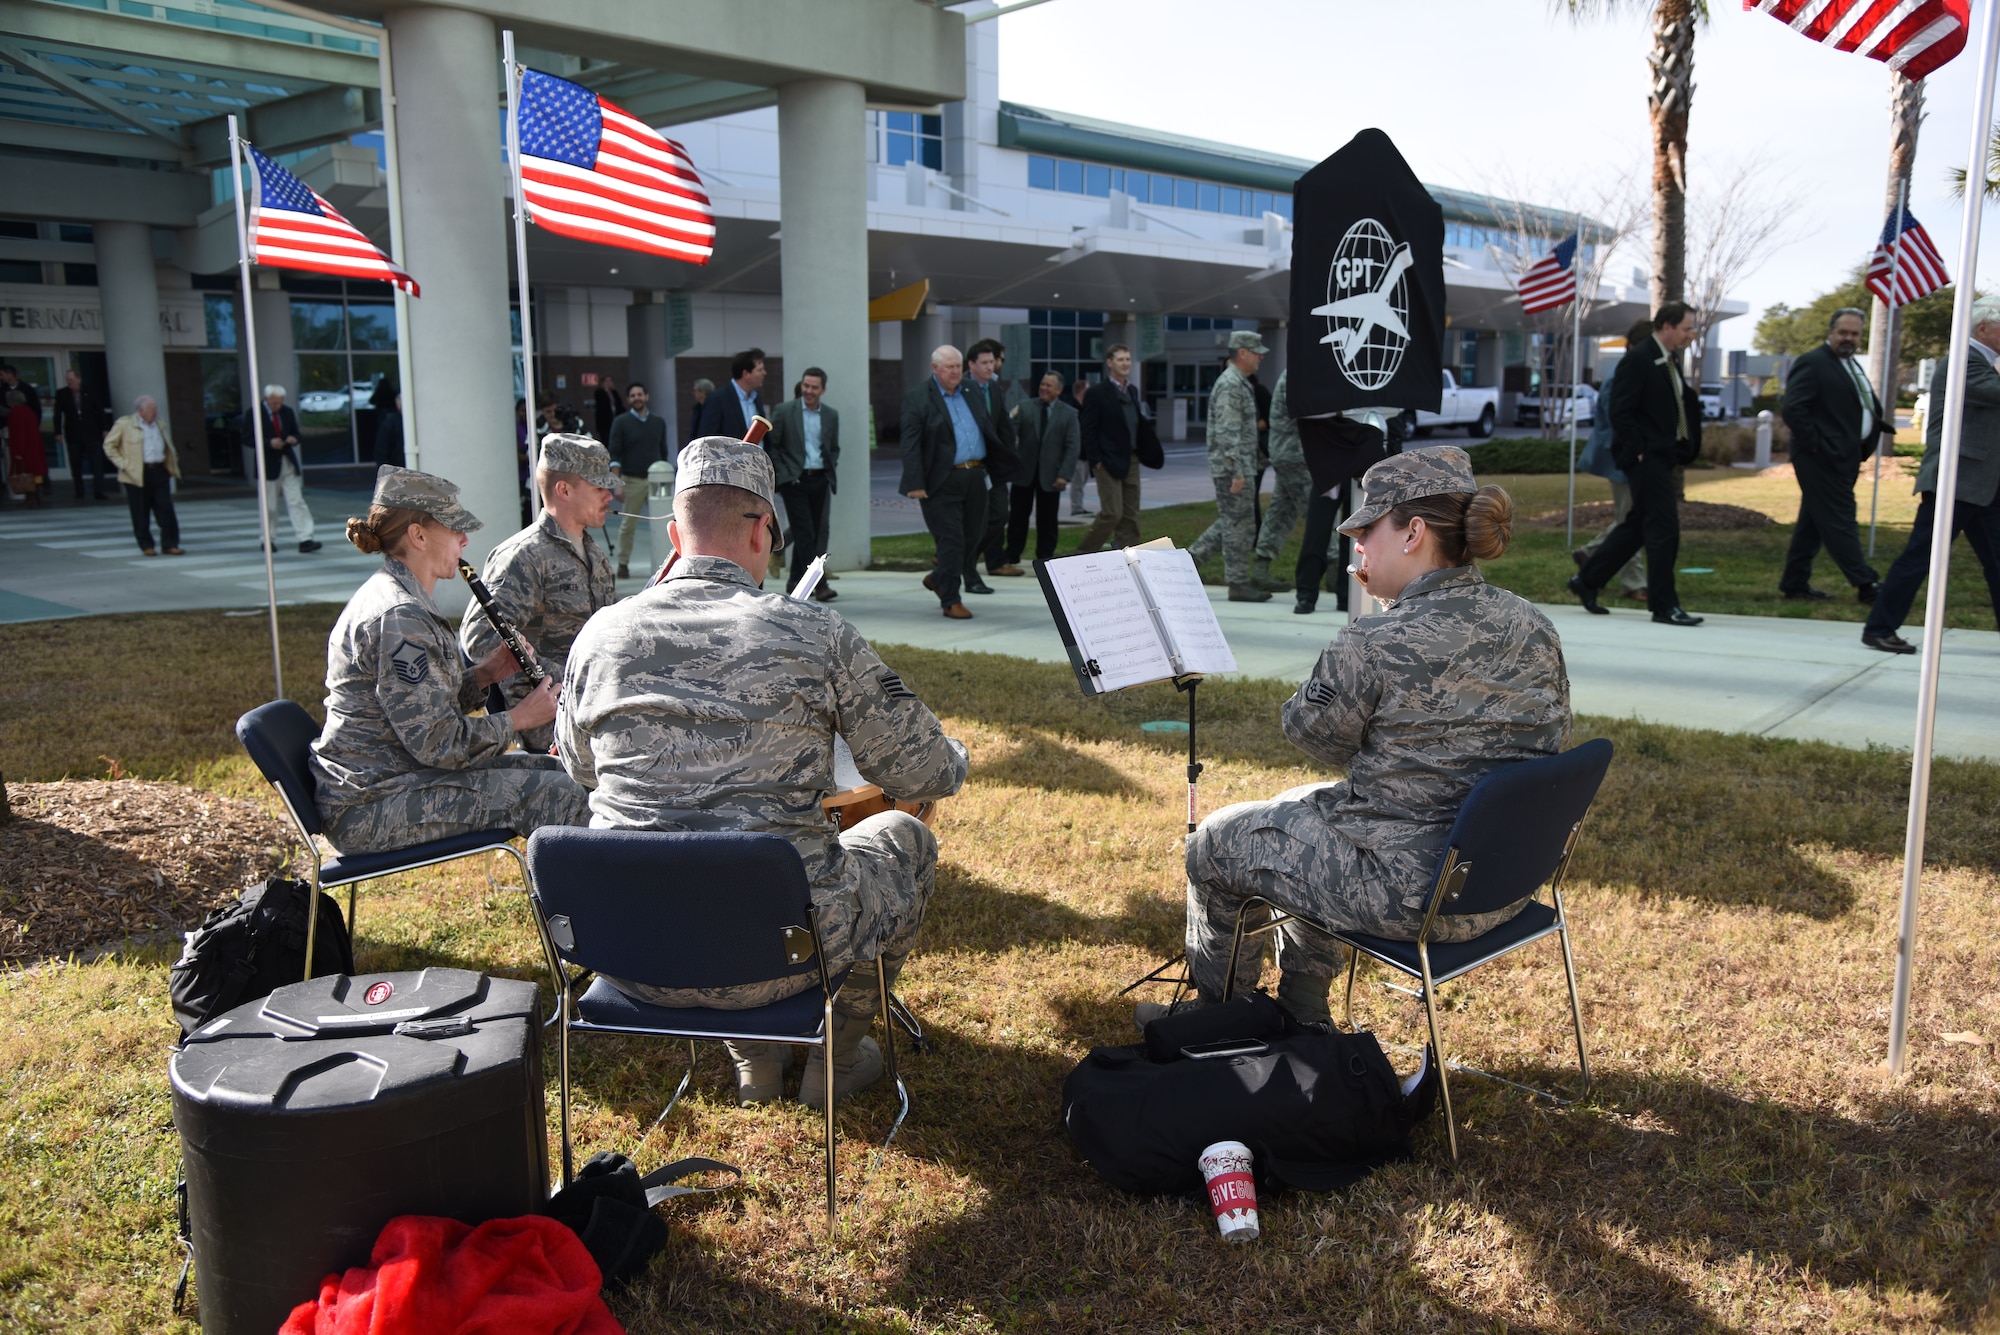 The U.S. Air Force Band of the West, Nightwatch, performs during the Gulfport-Biloxi International Airport 75 Year Commemoration Dec. 13, in Gulfport, Mississippi. During the two-day visit to Keesler the band performed for Airmen and local residents throughout various locations at Keesler and the nearby area. Their mission is to honor military heritage through music, connect with the American public and inspire patriotism and excellence. (U.S. Air Force photo by Kemberly Groue)